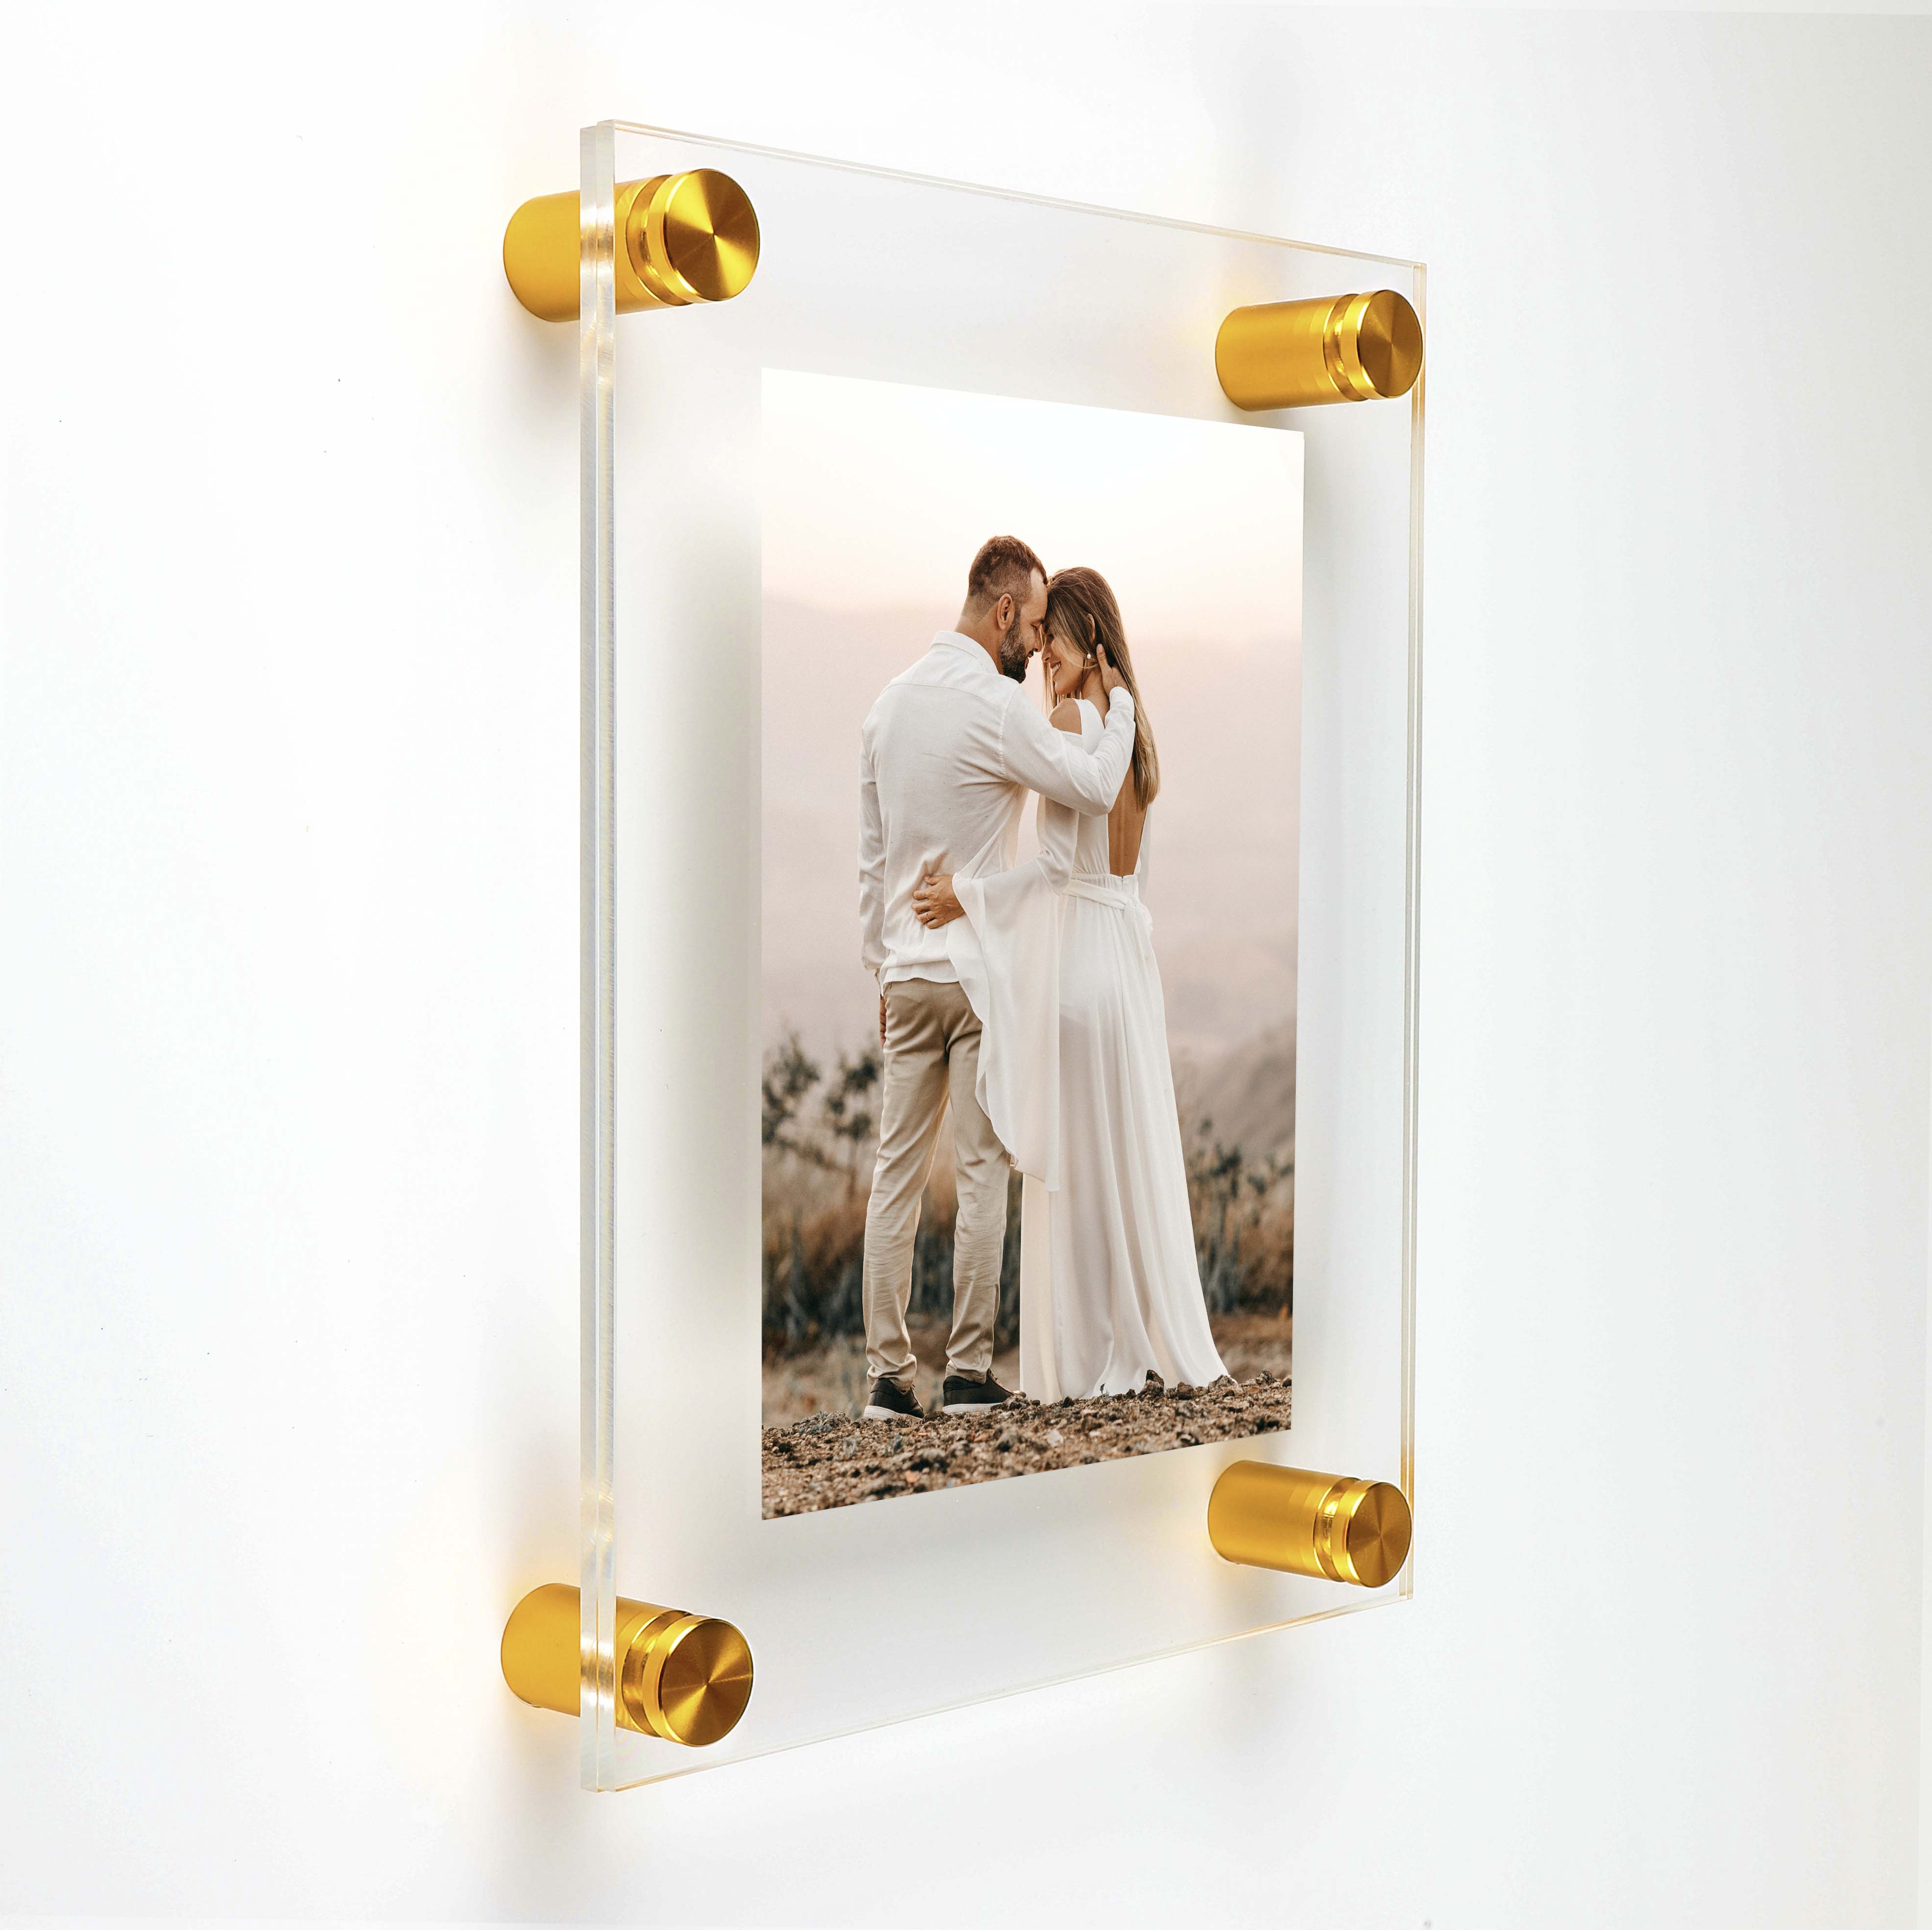 (2) 13-1/2'' x 16-1/2'' Clear Acrylics , Pre-Drilled With Polished Edges (Thick 1/8'' each), Wall Frame with (4) 5/8'' x 3/4'' Gold Anodized Aluminum Standoffs includes Screws and Anchors